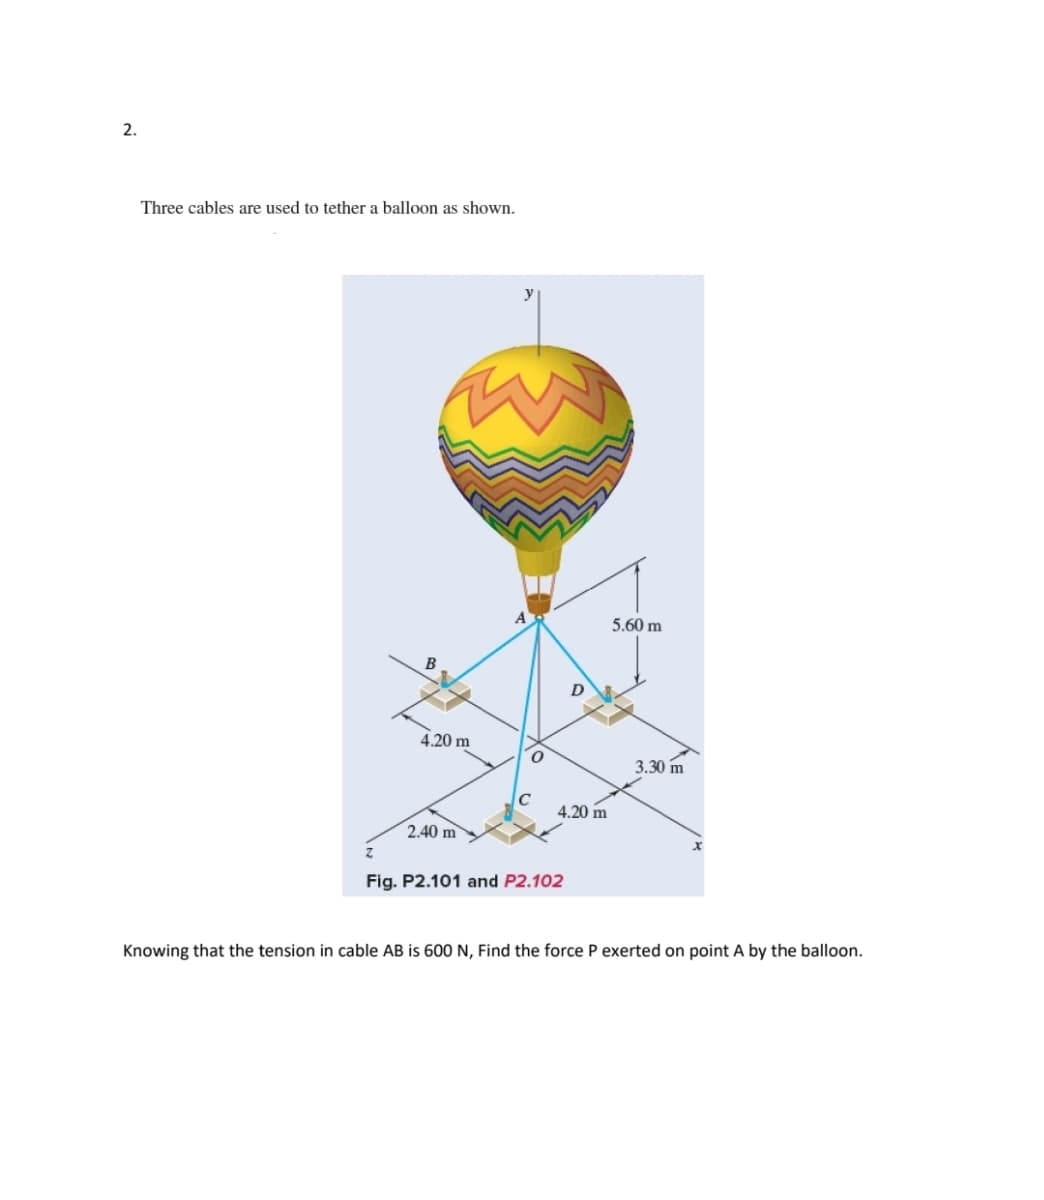 2.
Three cables are used to tether a balloon as shown.
B
4.20 m
2.40 m
D
4.20 m
Fig. P2.101 and P2.102
5.60 m
3.30 m
Knowing that the tension in cable AB is 600 N, Find the force P exerted on point A by the balloon.